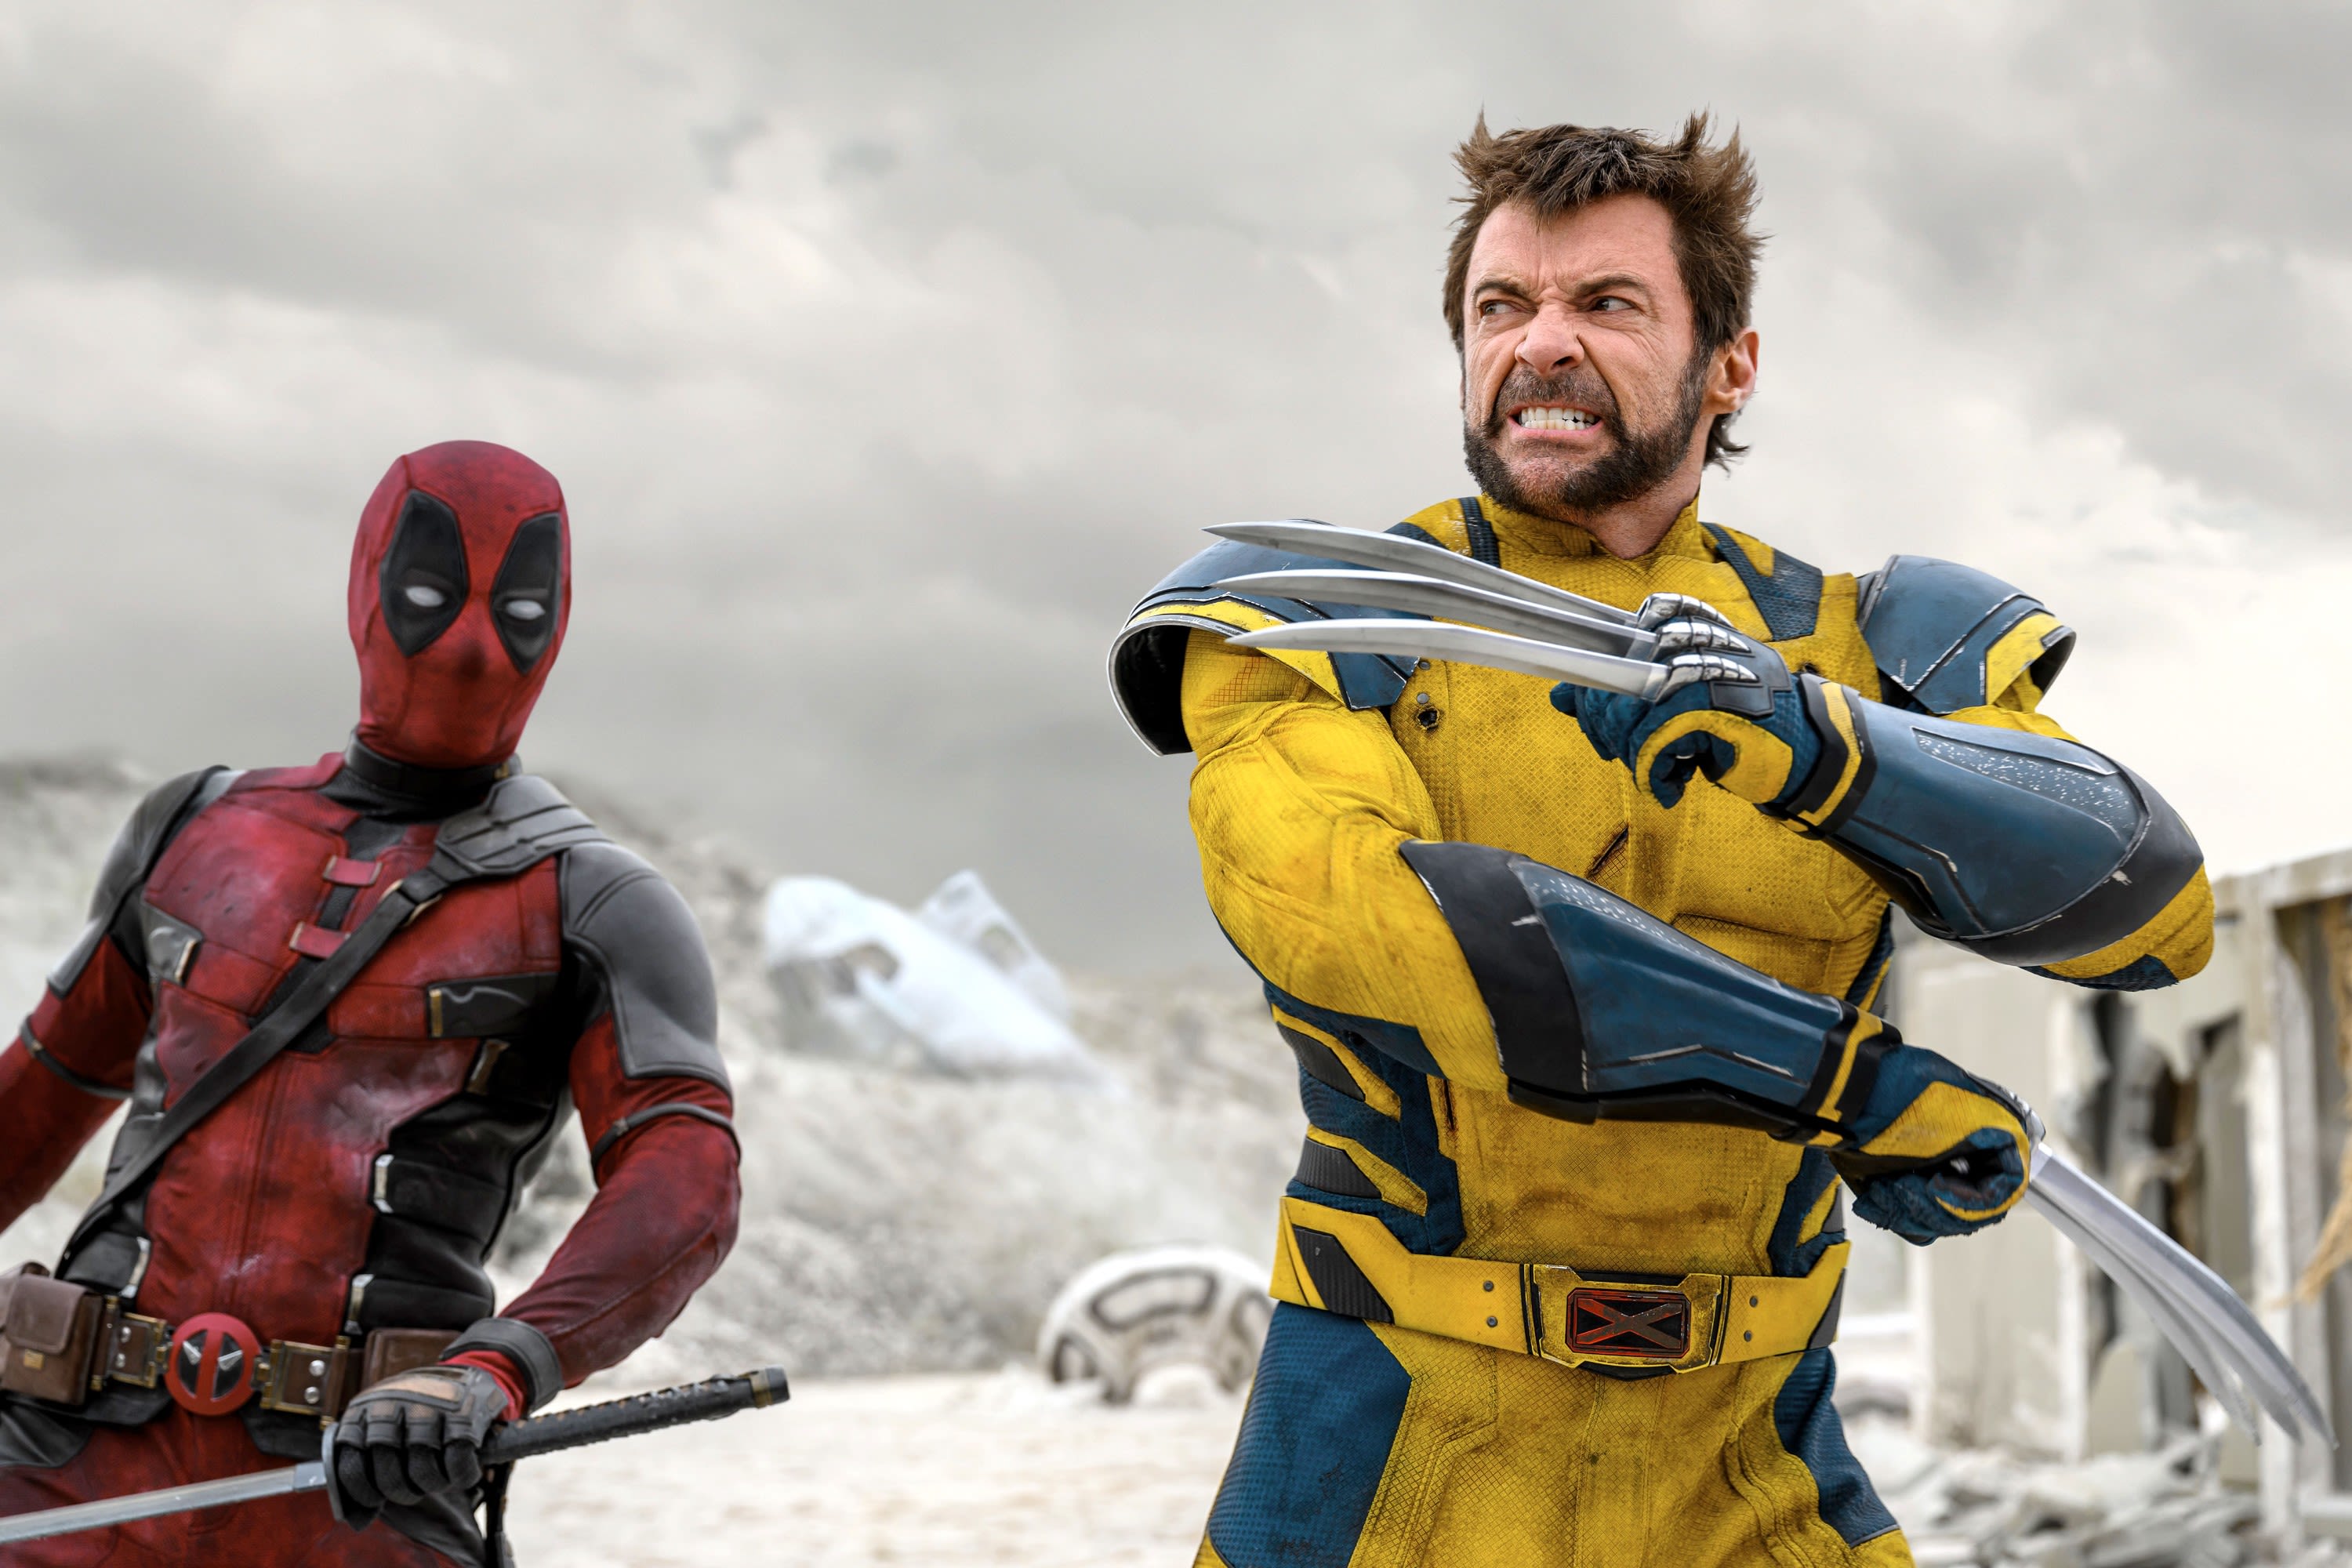 ‘Deadpool & Wolverine’ Review: Ryan Reynolds And Hugh Jackman Deliver – And Then Some – In Dream Blockbuster Pairing For The...